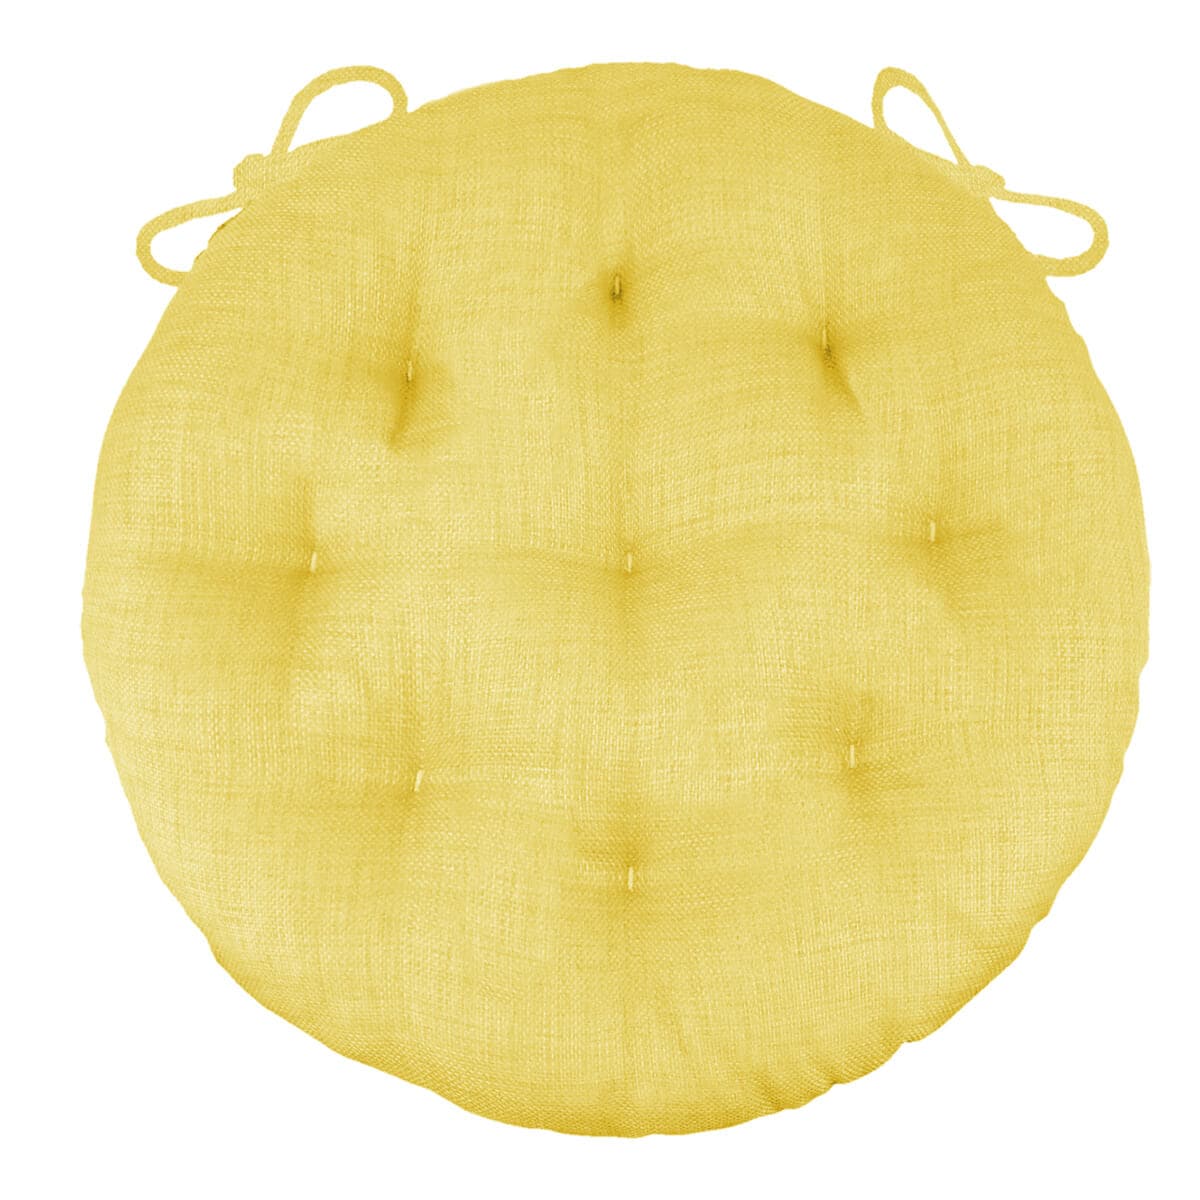 Rave Yellow Gold Bistro Chair Pad - 16" Round Cushion with Ties -Barnett Home Decor - Indoor/Outdoor